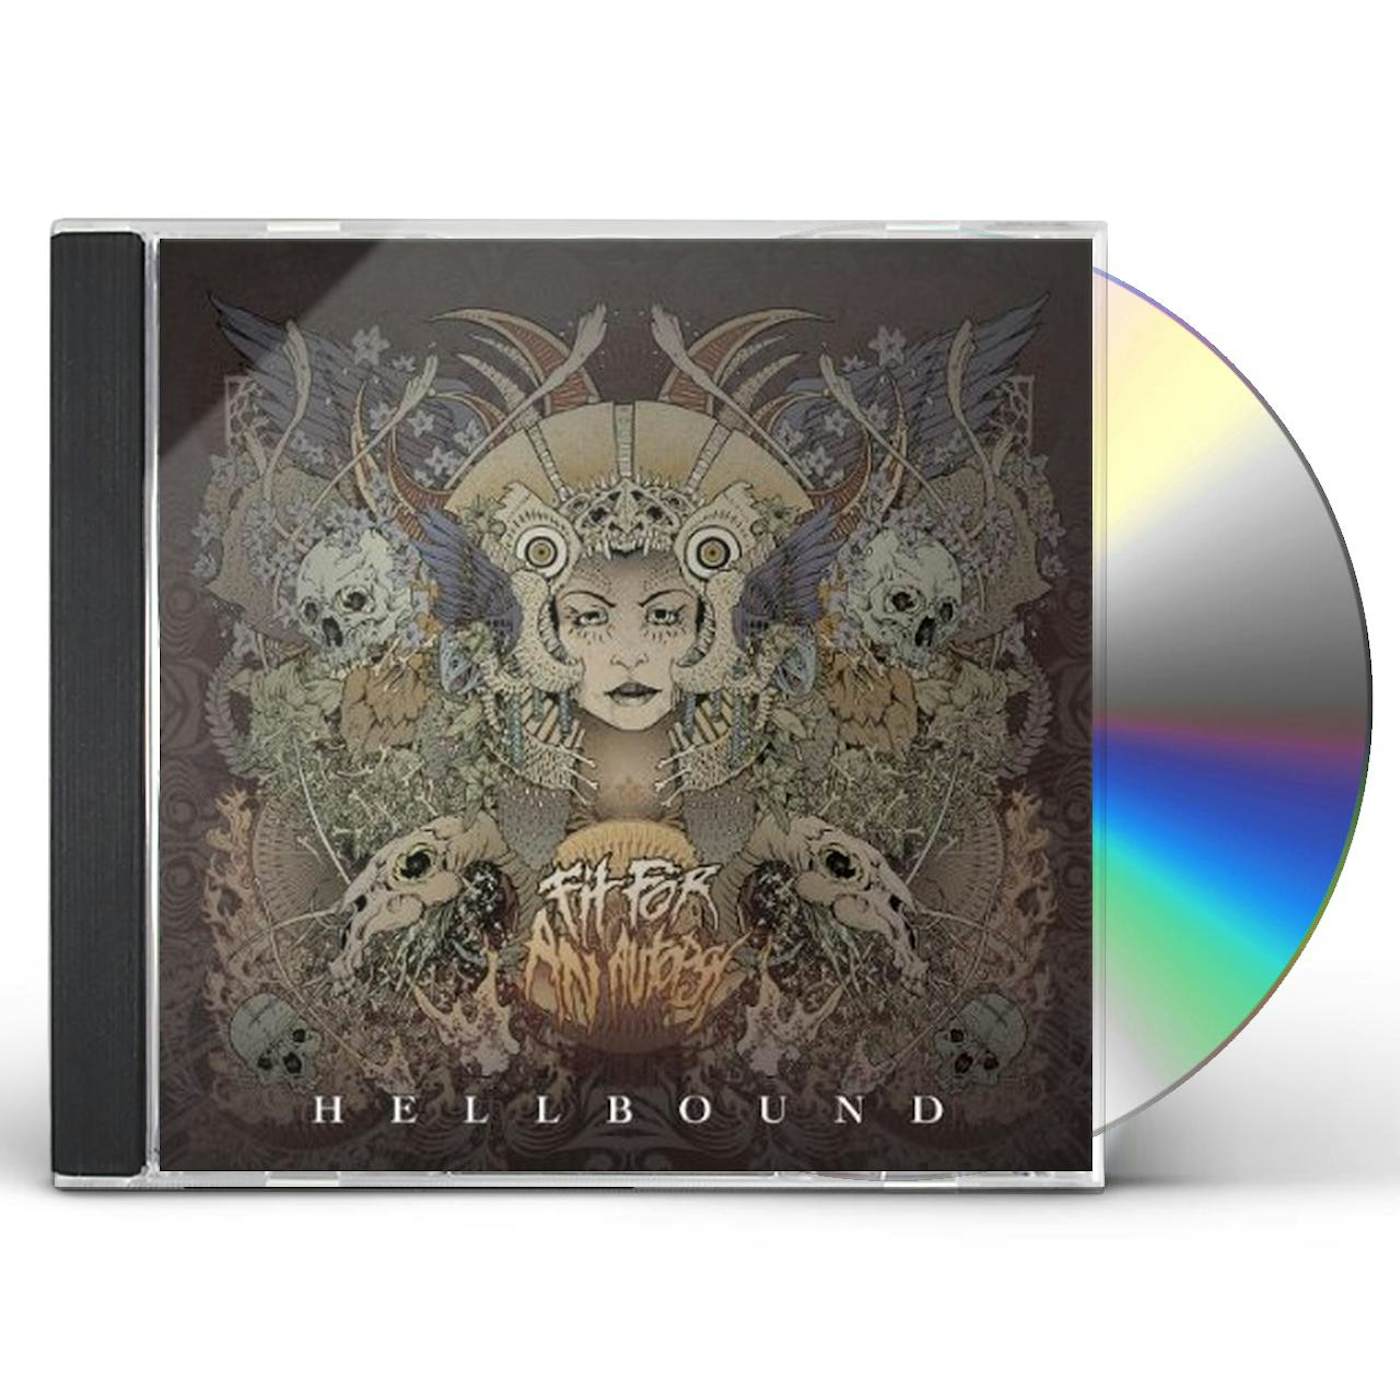 Fit For An Autopsy HELLBOUND CD